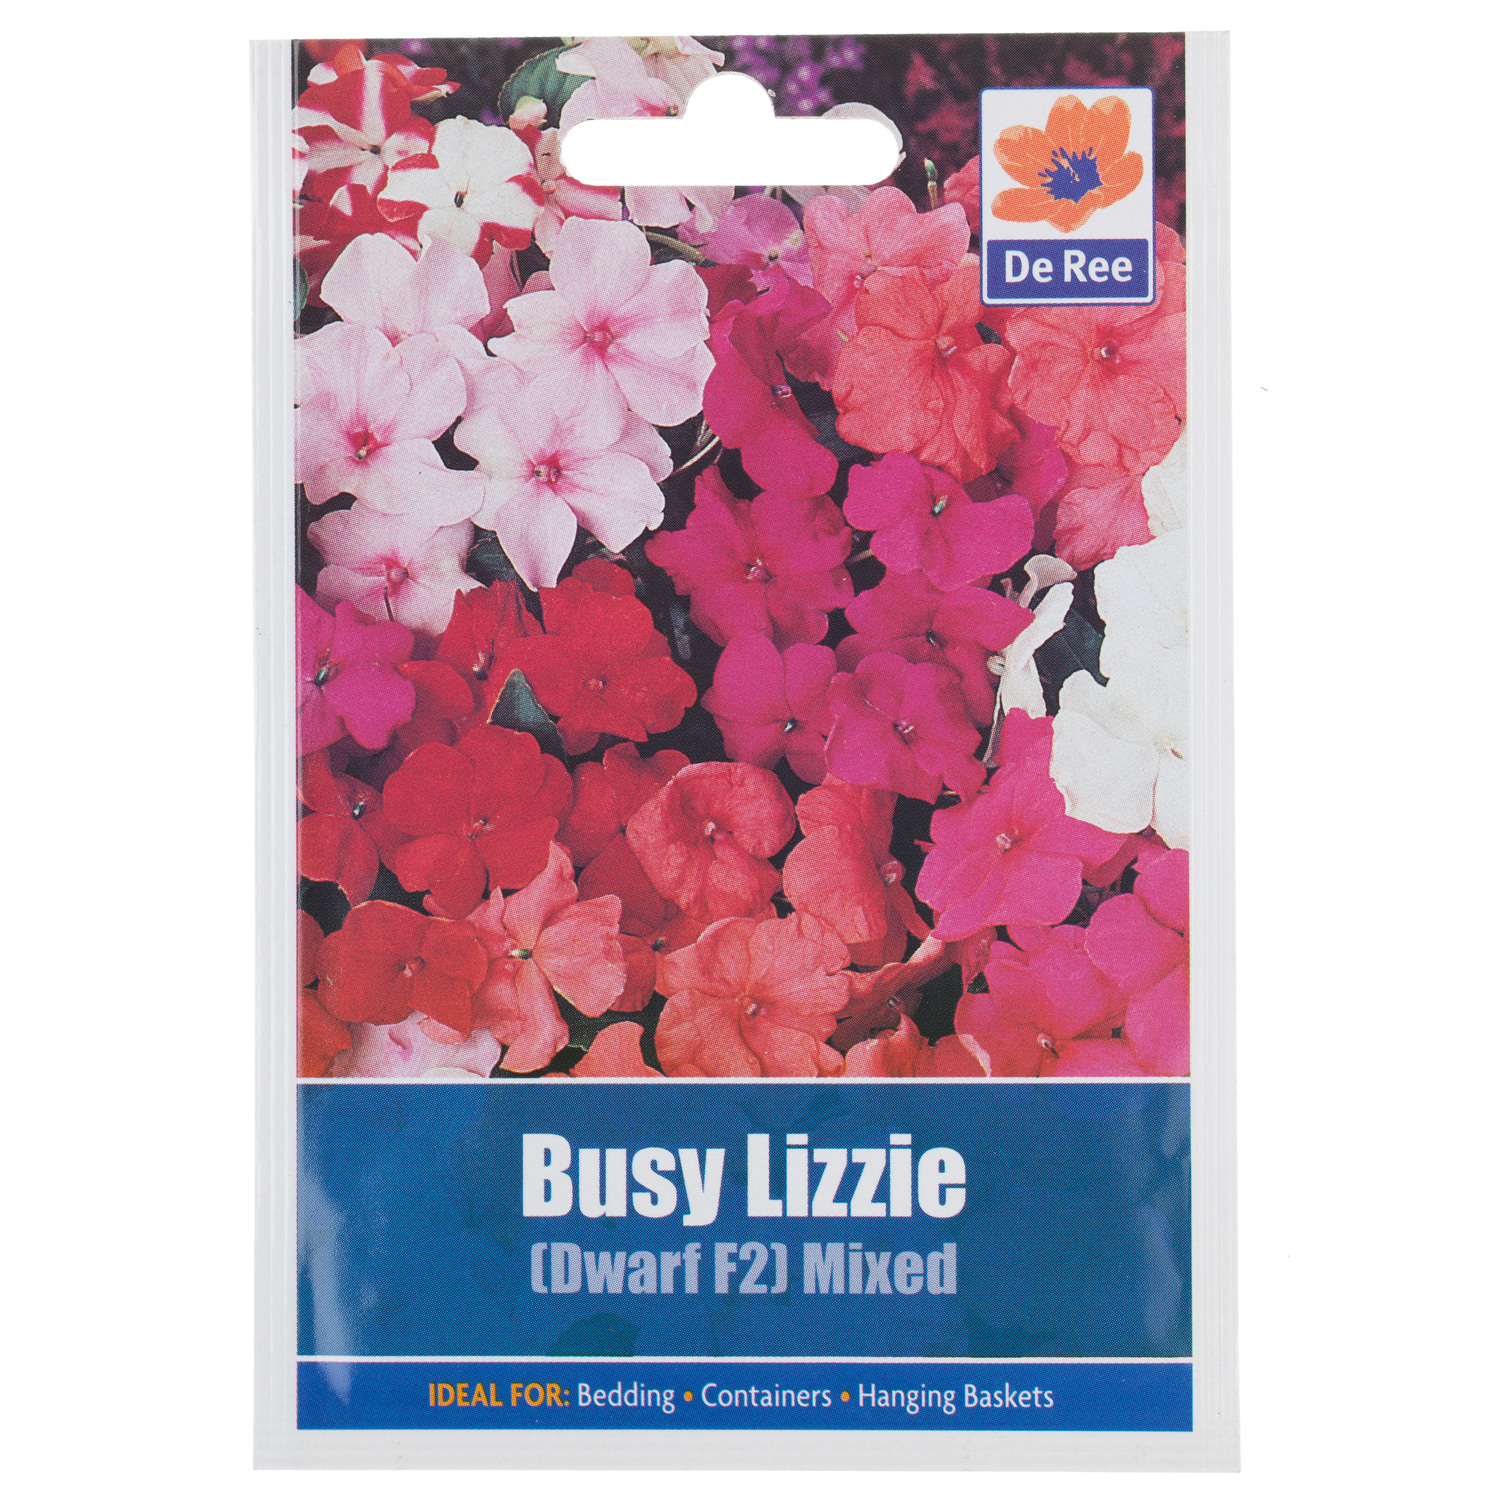 Busy Lizzie Dwarf F2 Mixed Seed Packet Image